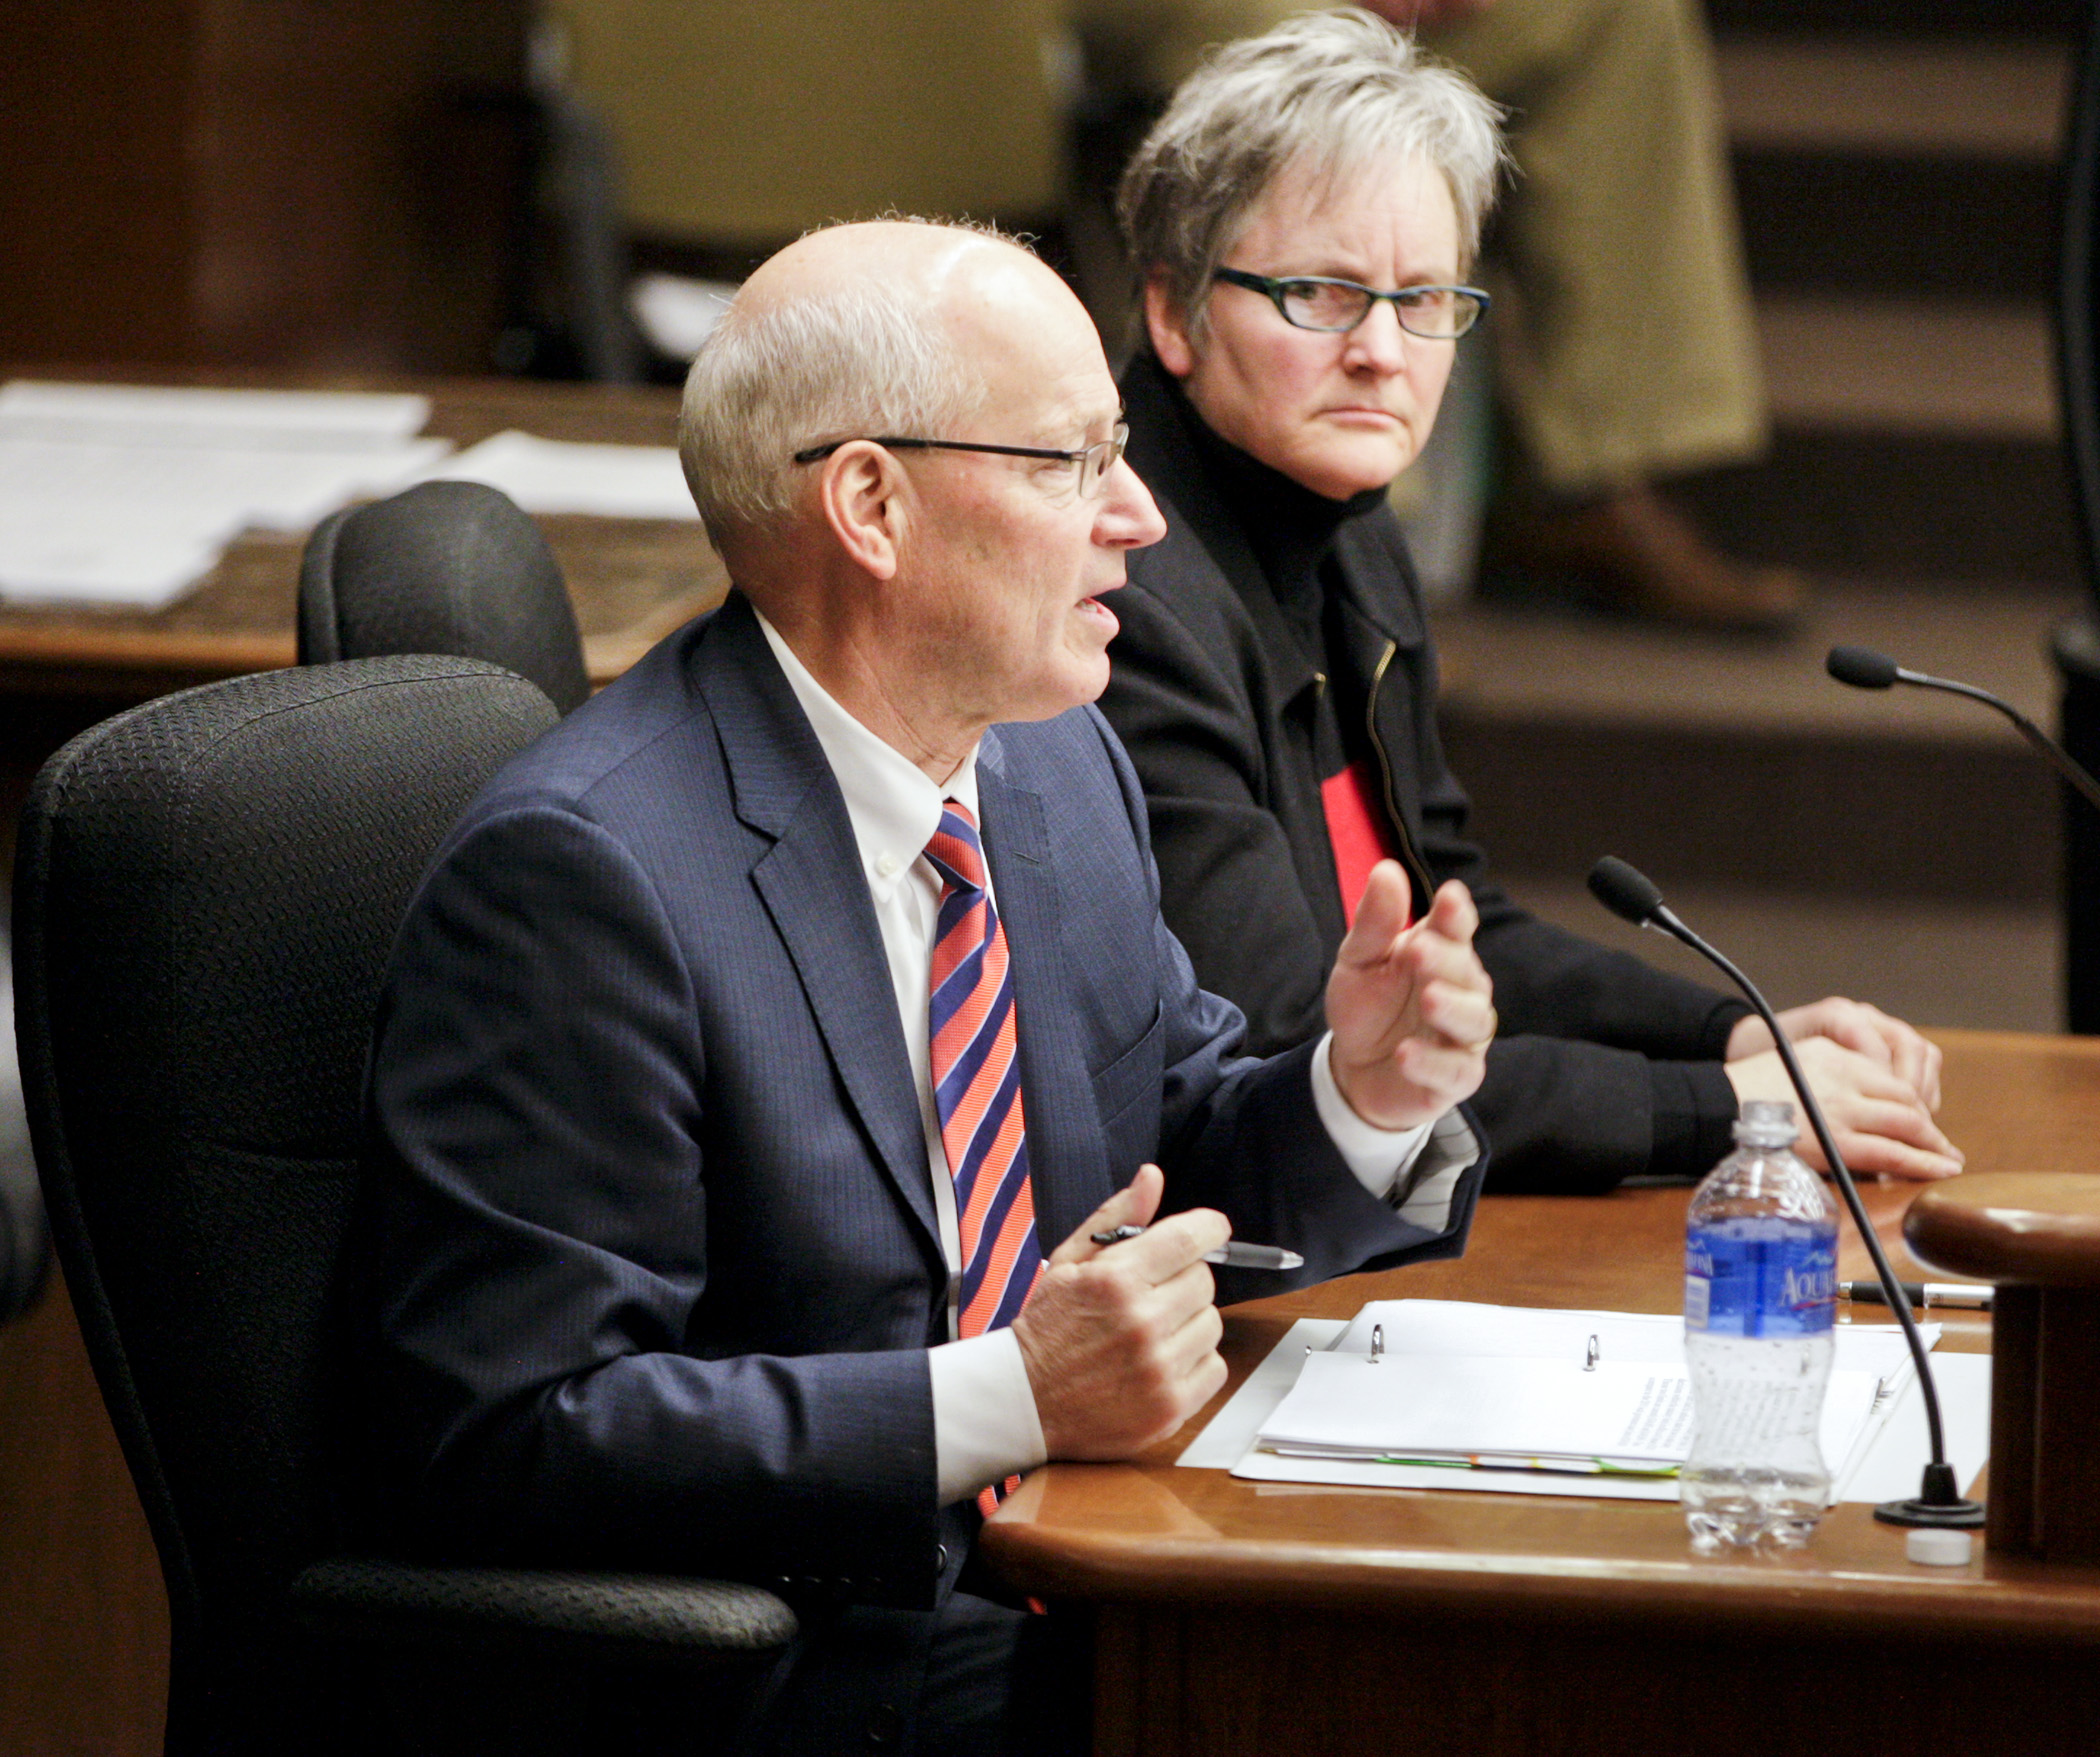 Minnesota Management & Budget Commissioner Myron Frans answers a members question during testimony before the House State Government Finance Committee Feb. 12. Seated with him is State Budget Director Margaret Kelly. Photo by Paul Battaglia